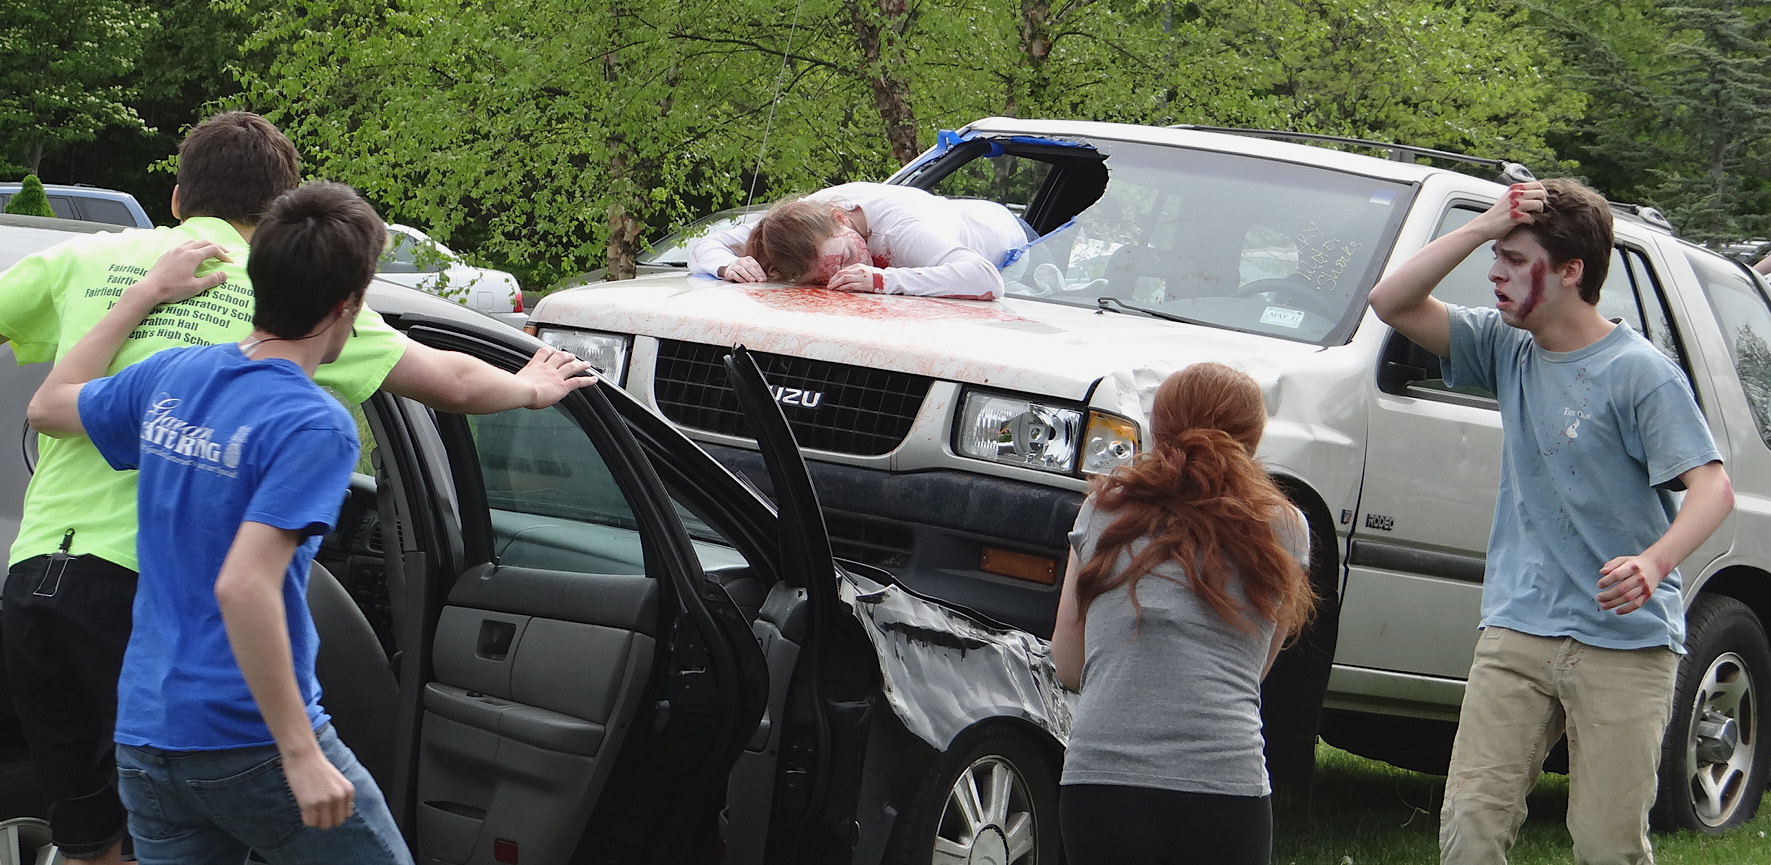 Crash Course At Warde Drunken Distracted Driving Dangers Highlighted 